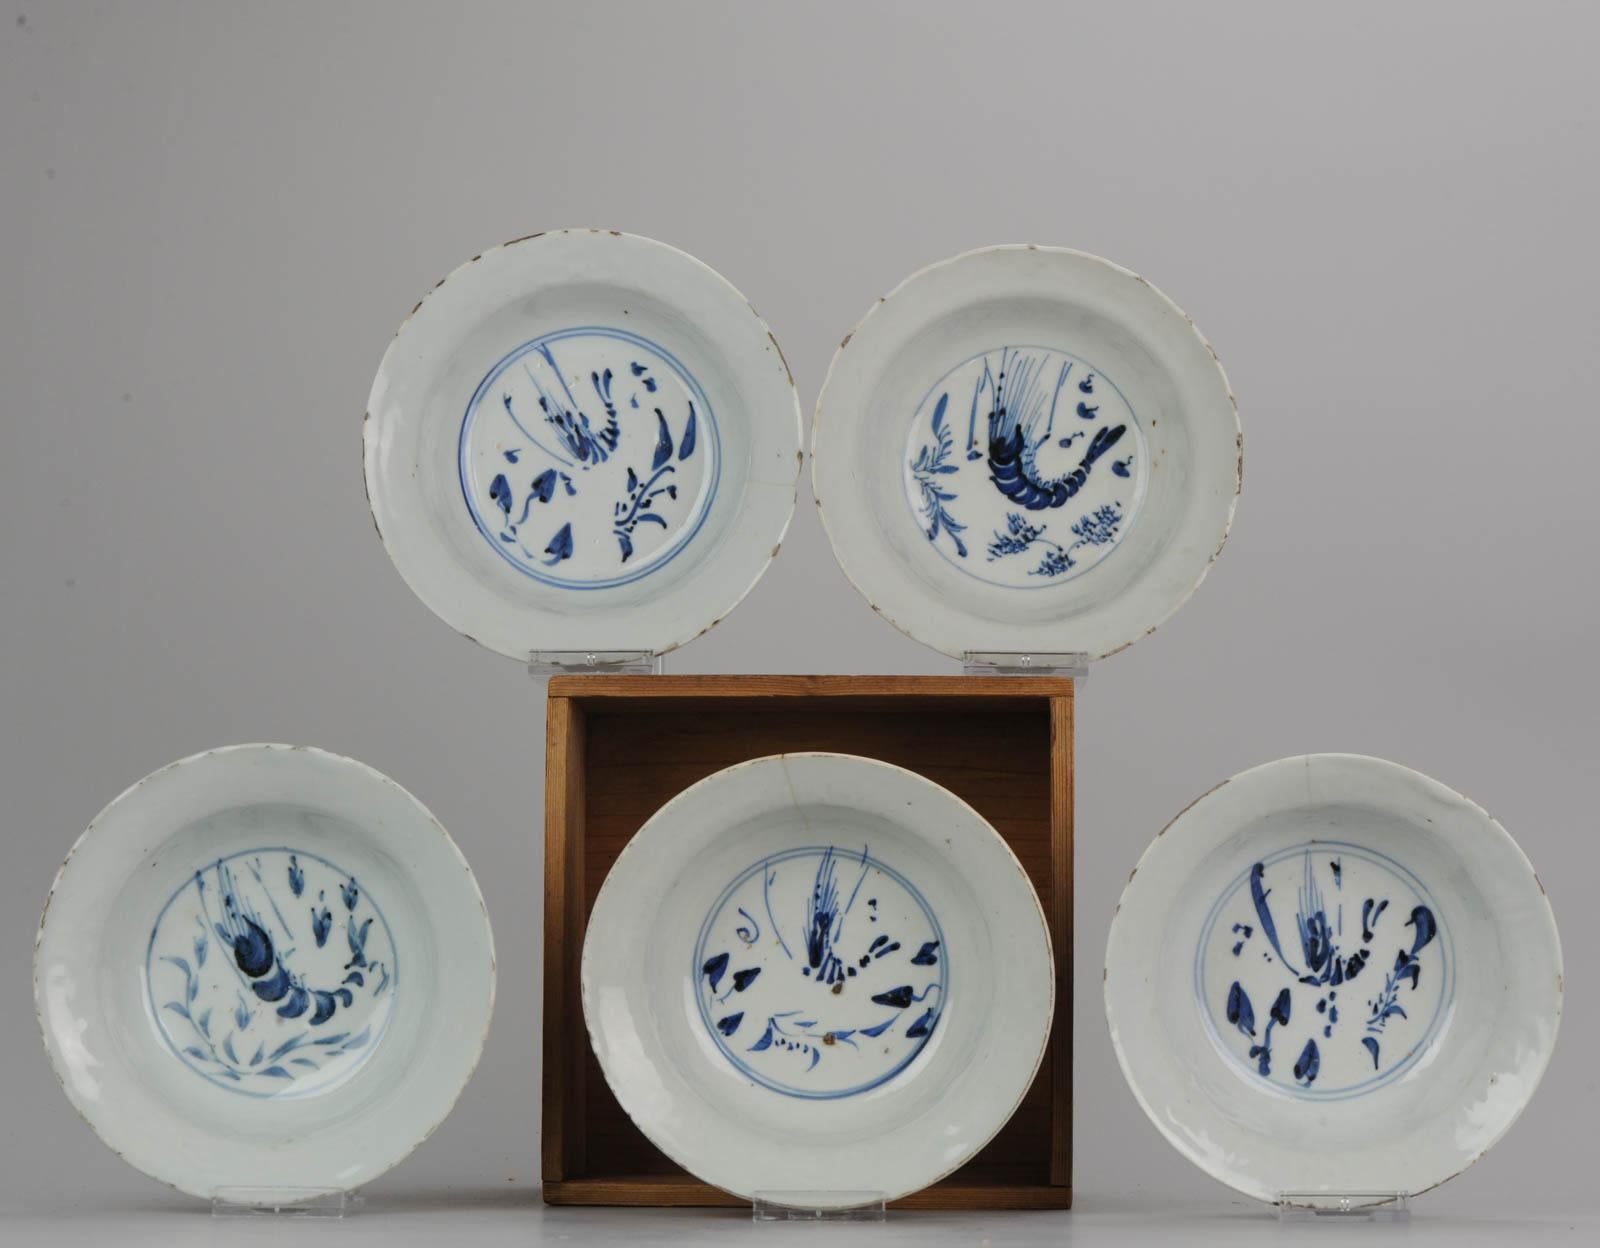 A Ming blue and white porcelain klapmuts/bowl, Transitional period, Tianqi or Chongzhen, circa 1625-1640. The steep sided but shallow Ko-Sometsuke porcelain bowl has a moulded border in the Kraak style and is decorated with a shrimp or prawn among